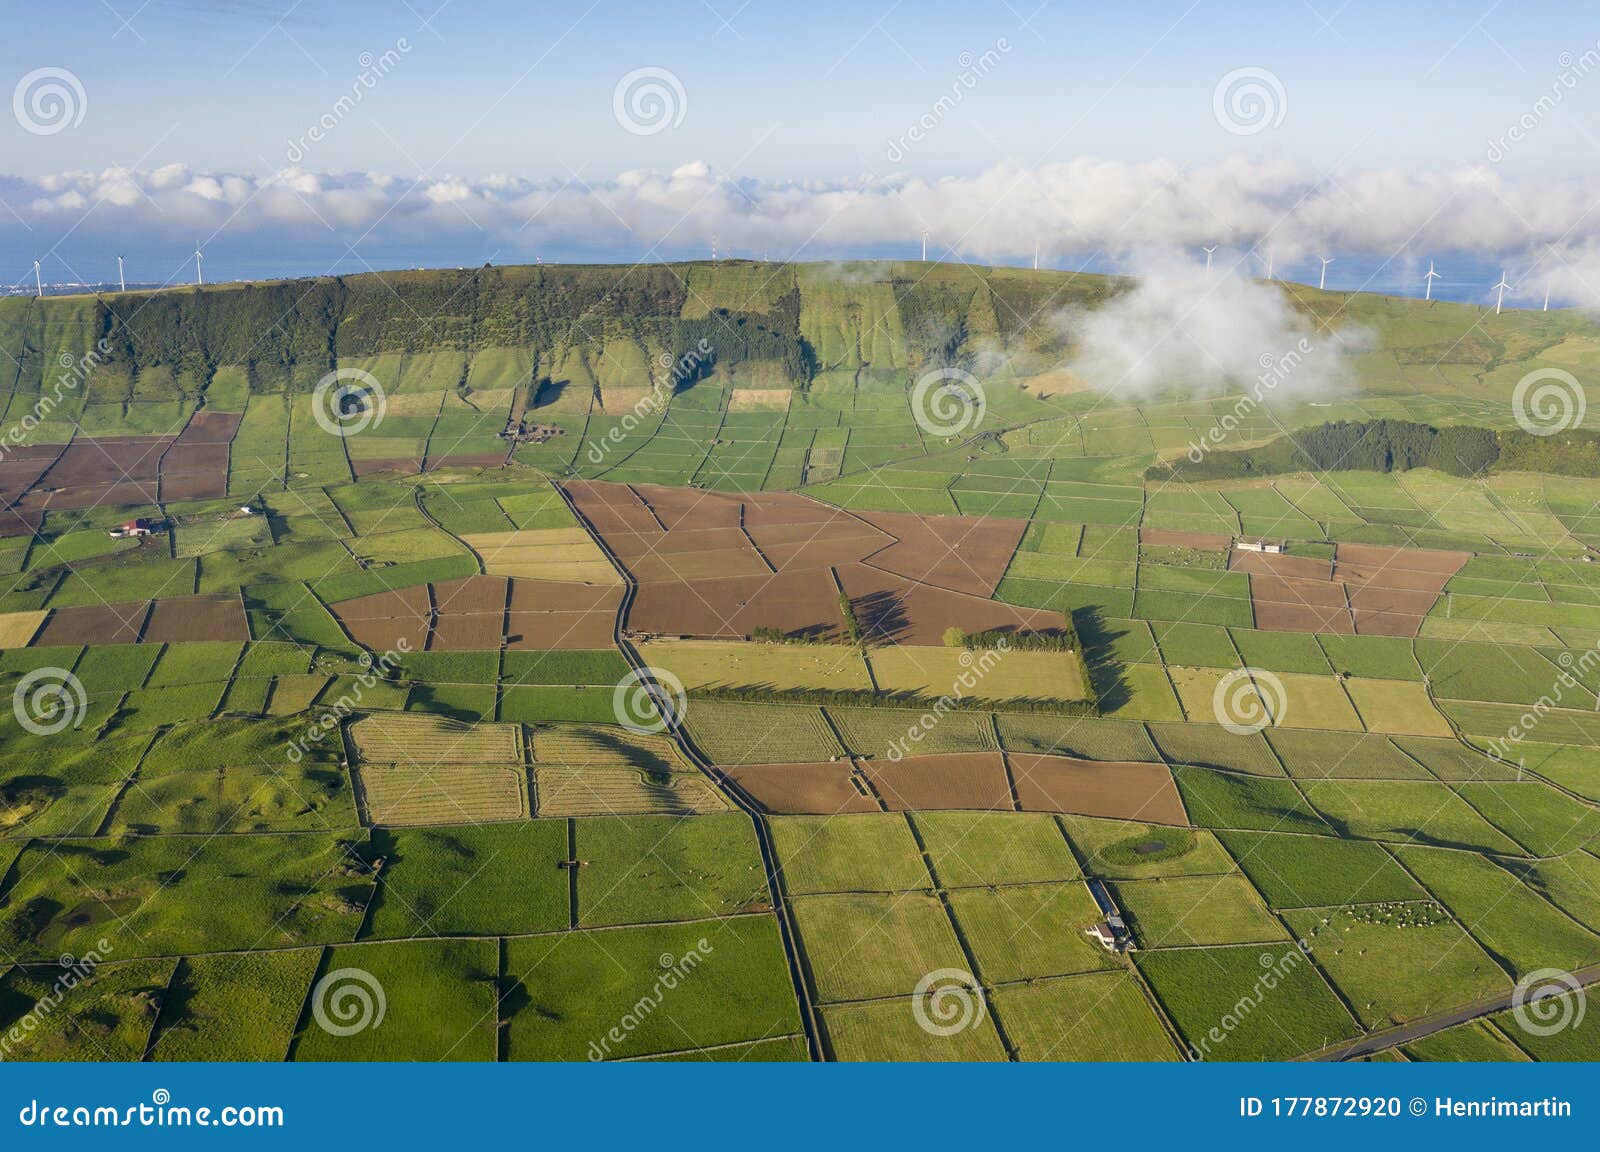 aerial views on the typical abstract countryside of the east of terceira island, one of the islands of the aÃÂ§ores azores